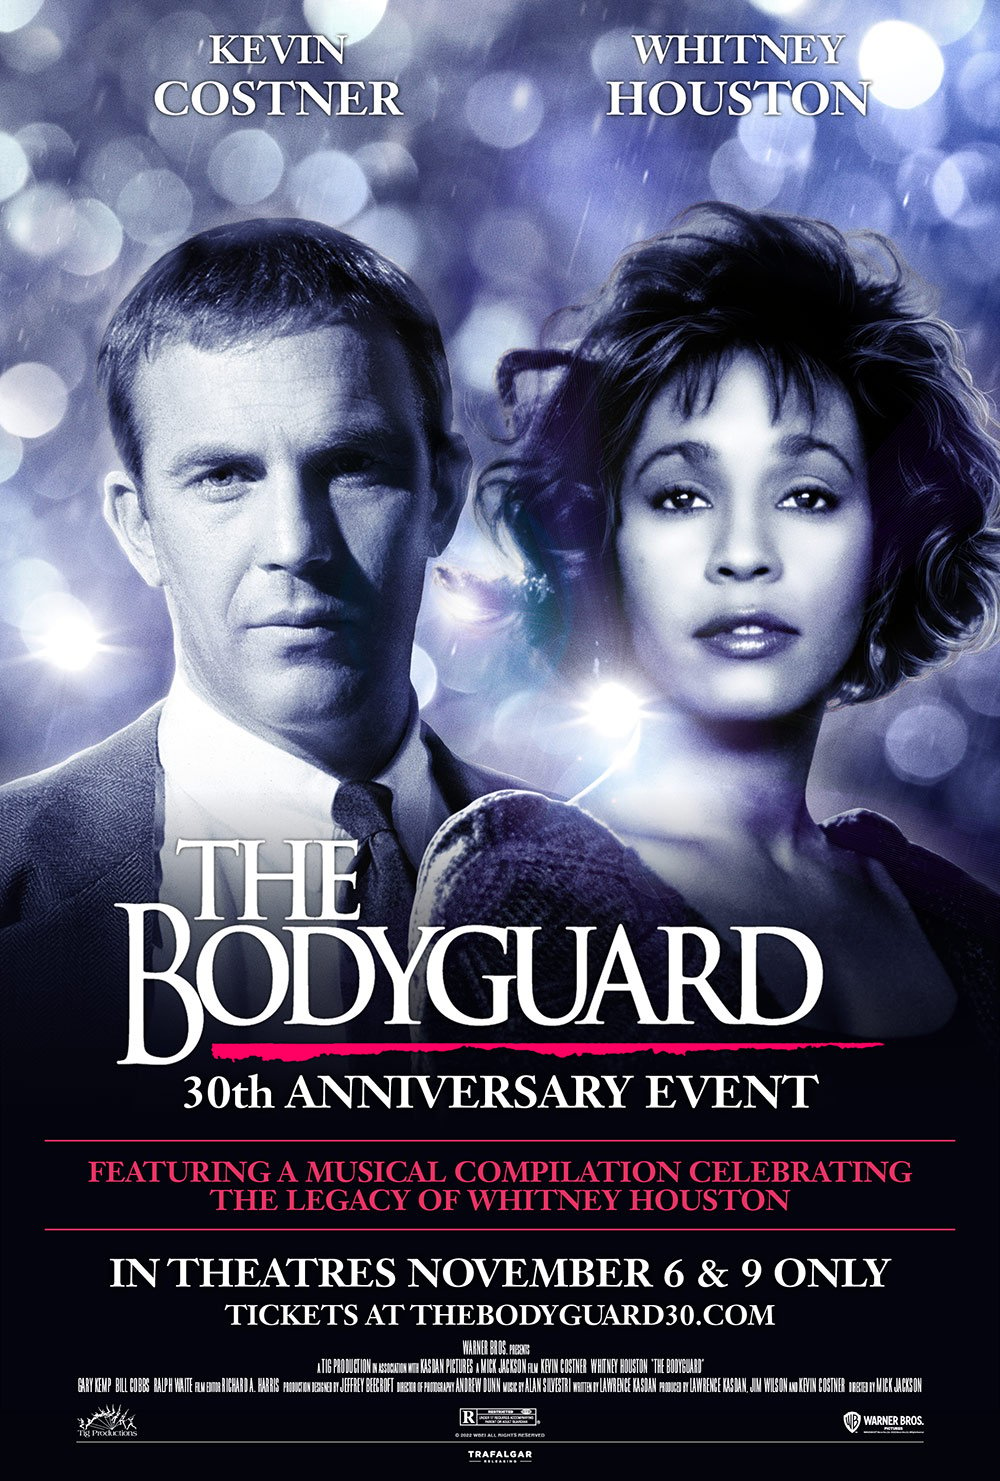 Tickets On Sale Now For &#8216;The Bodyguard 30th Anniversary&#8217; At www.TheBodyguard30.com